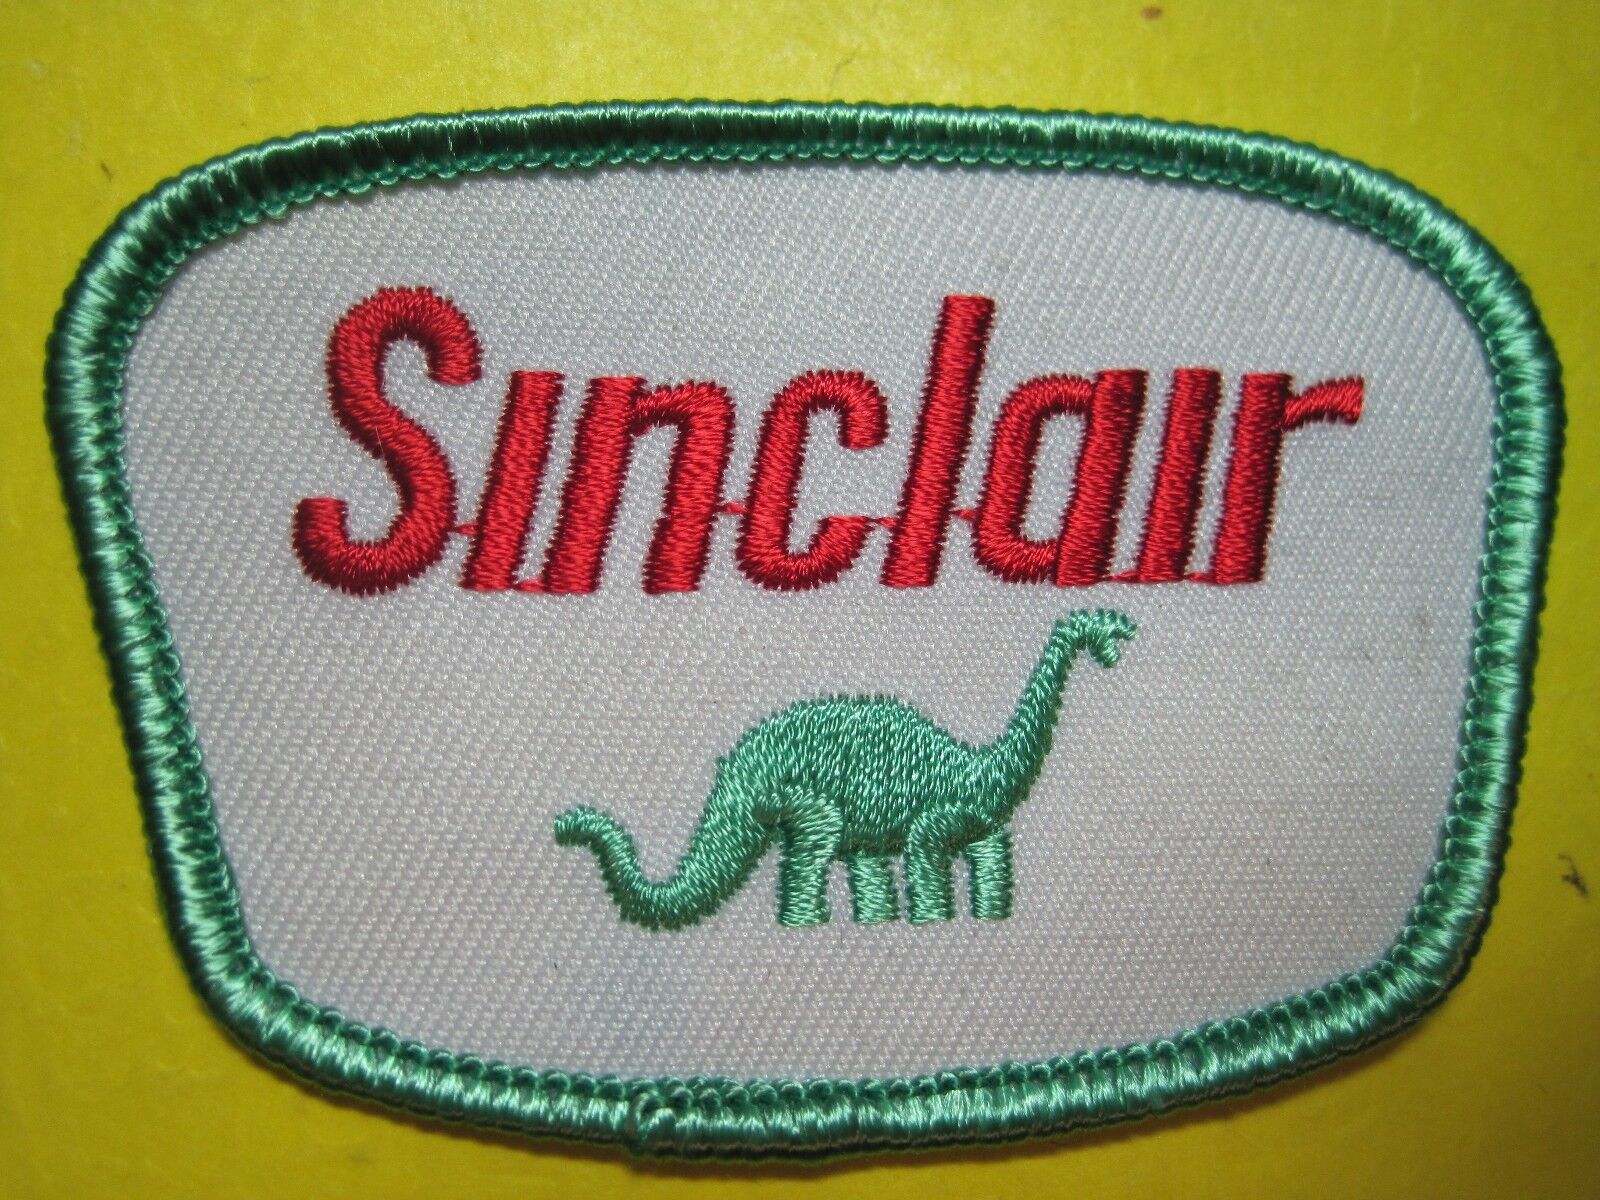 SINCLAIR DINO GASOLINE PATCH IRON ON or SEW ON SMALL CREST SHAPE BEST ON PLANET